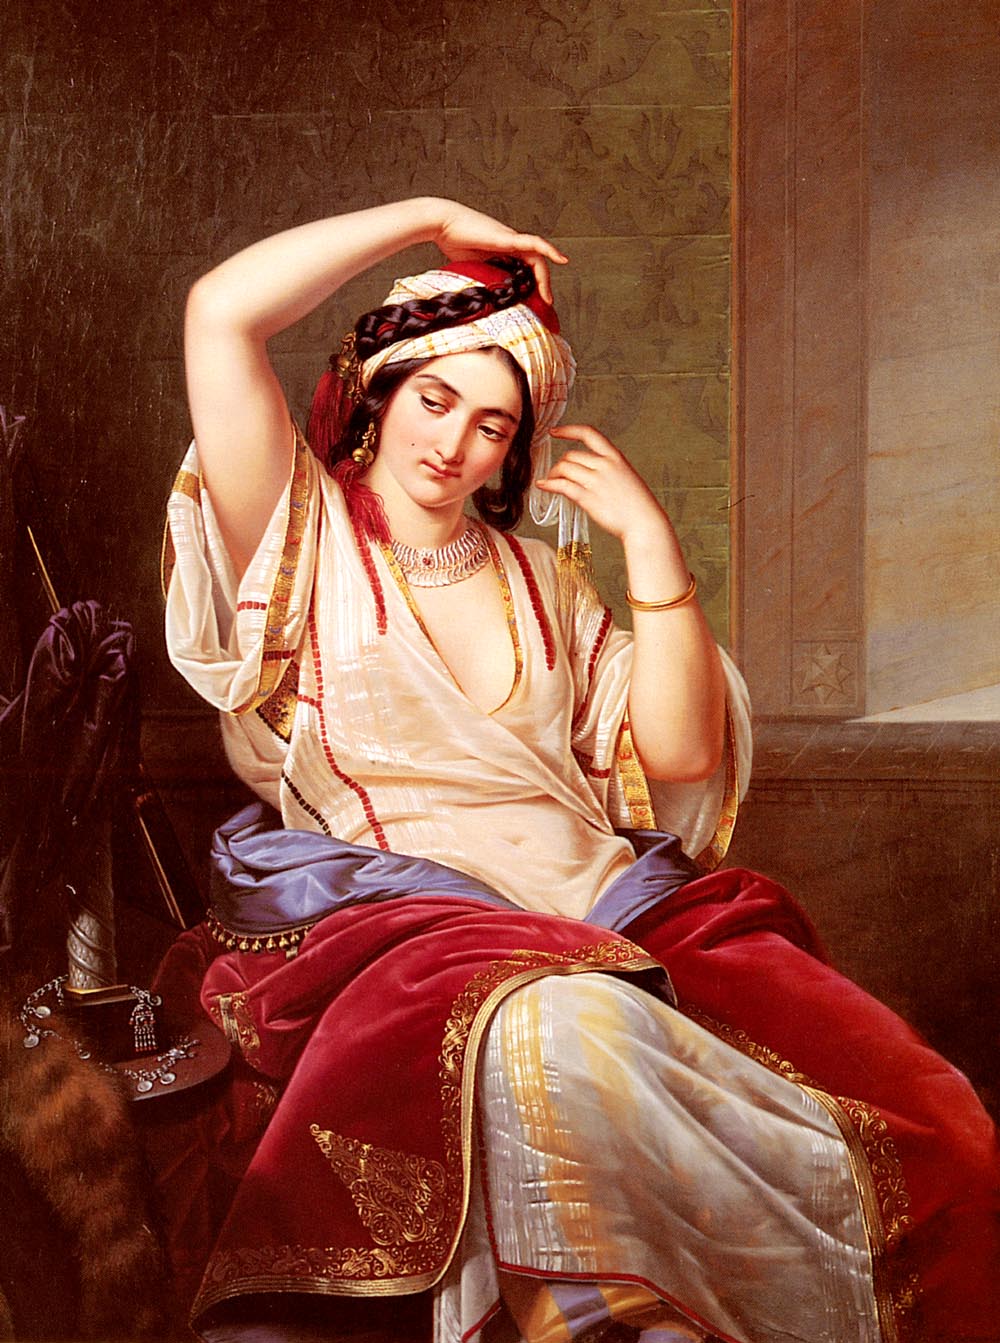 A Harem Beauty At Her Toilette by Paul Emil Jakobs	